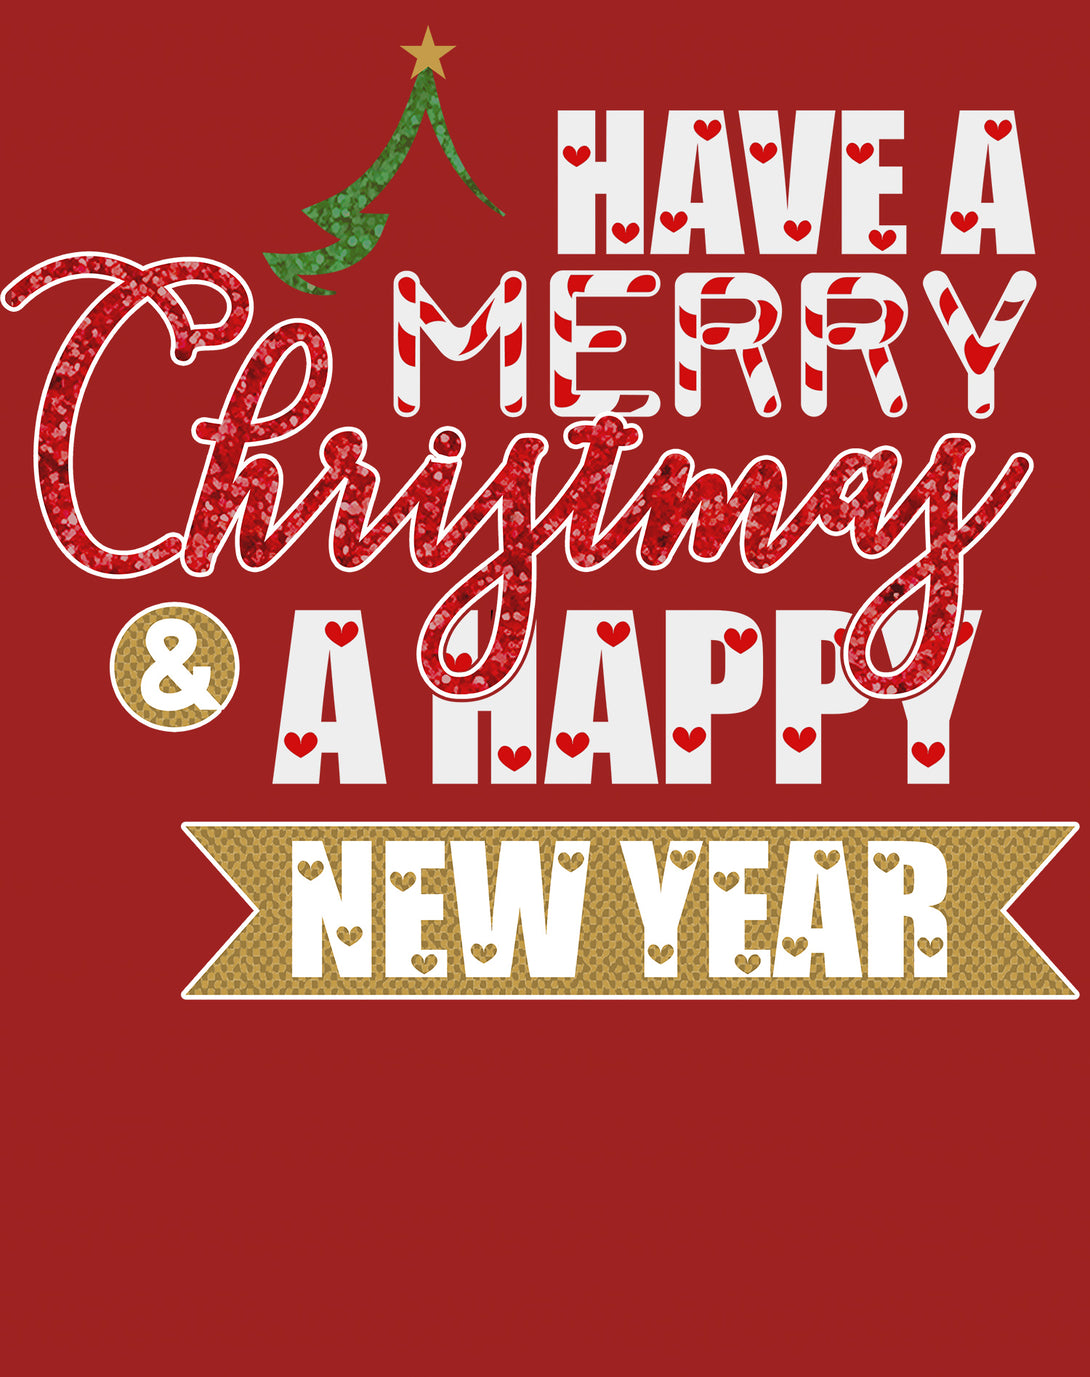 NYE Merry Christmas Happy New Year Hearts Party Xmas Eve Women's T-Shirt Red - Urban Species Design Close Up